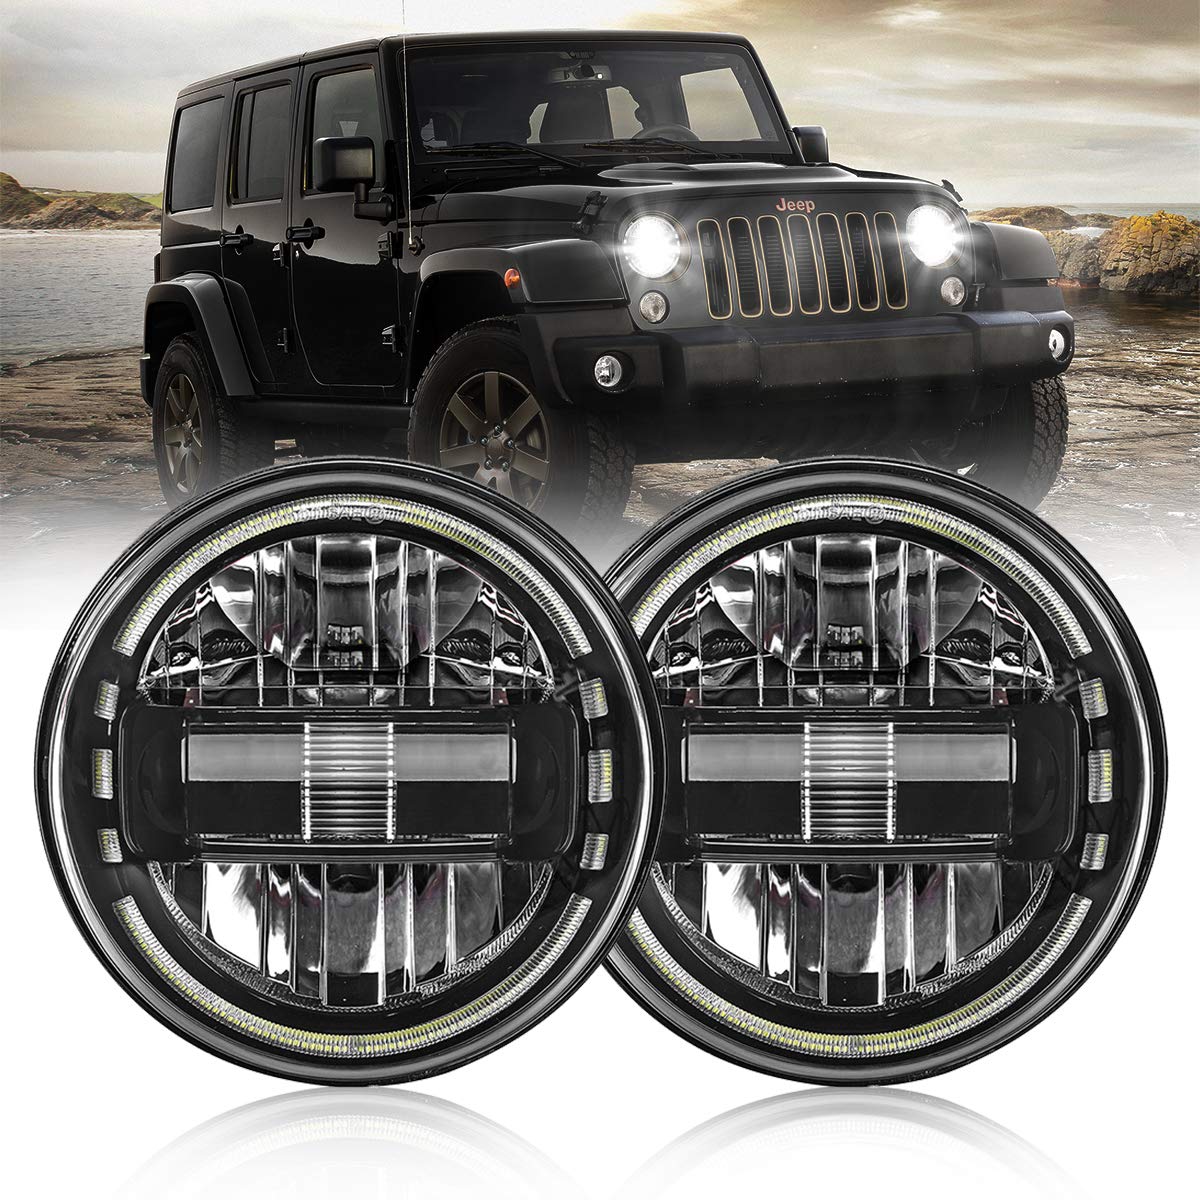 7 Inch Led Headlights DOT Approved Jeep Headlight with DRL Low Beam and High Beam for Jeep Wrangler JK LJ CJ TJ 1997-2018 Headlamps Hummer H1 H2-2019 Exclusive Patent Black 